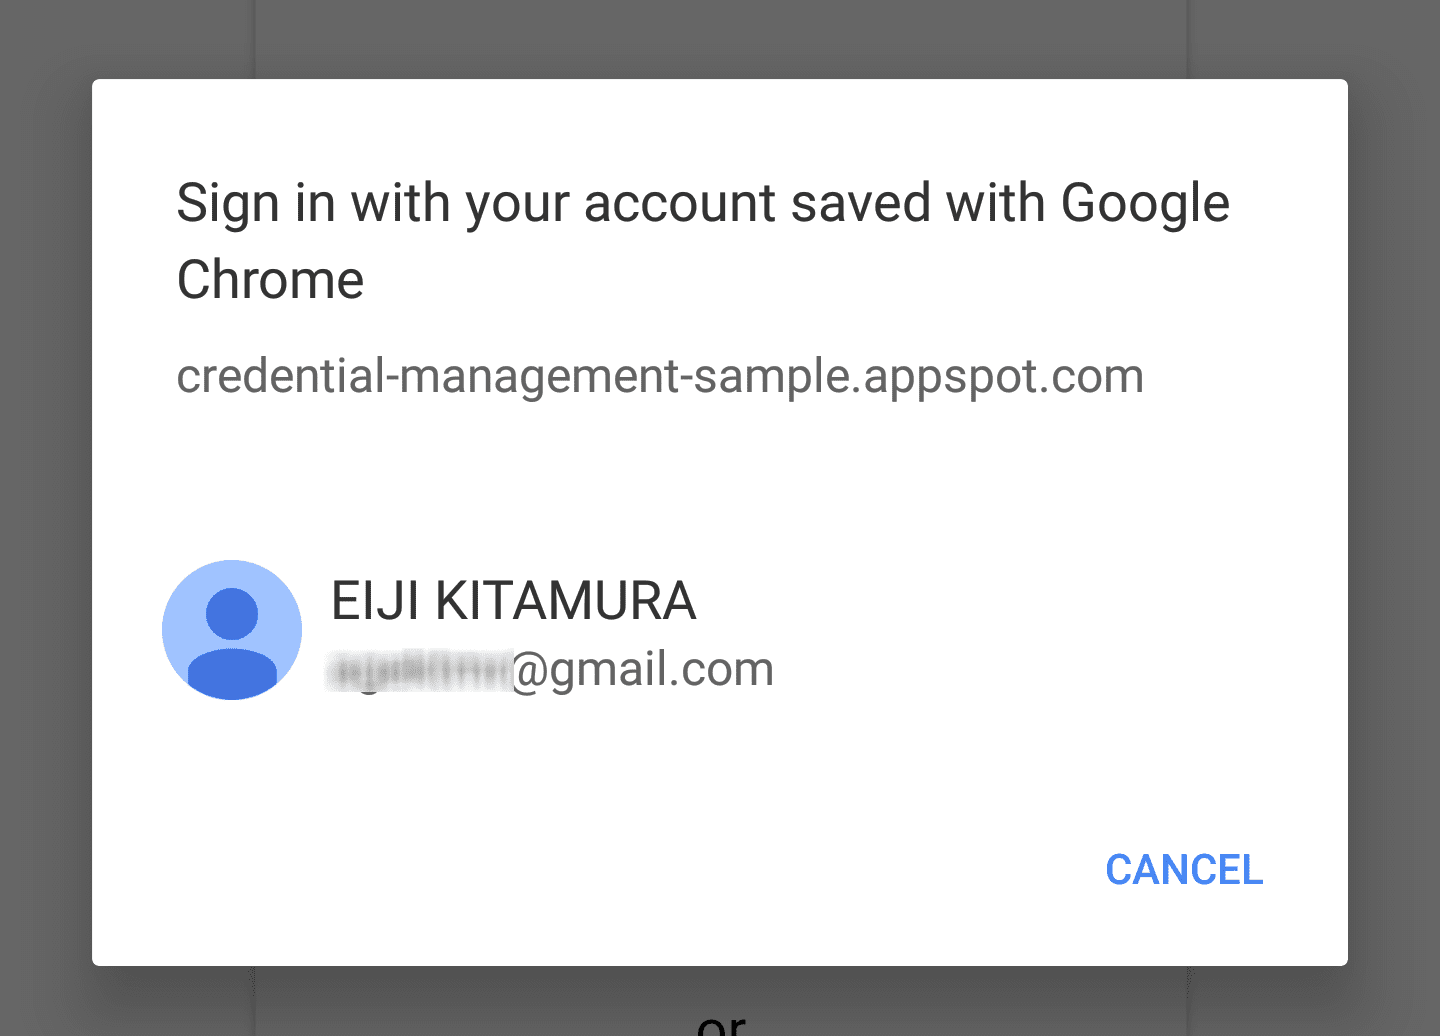 An account chooser UI pops up for user to select an account to sign-in.